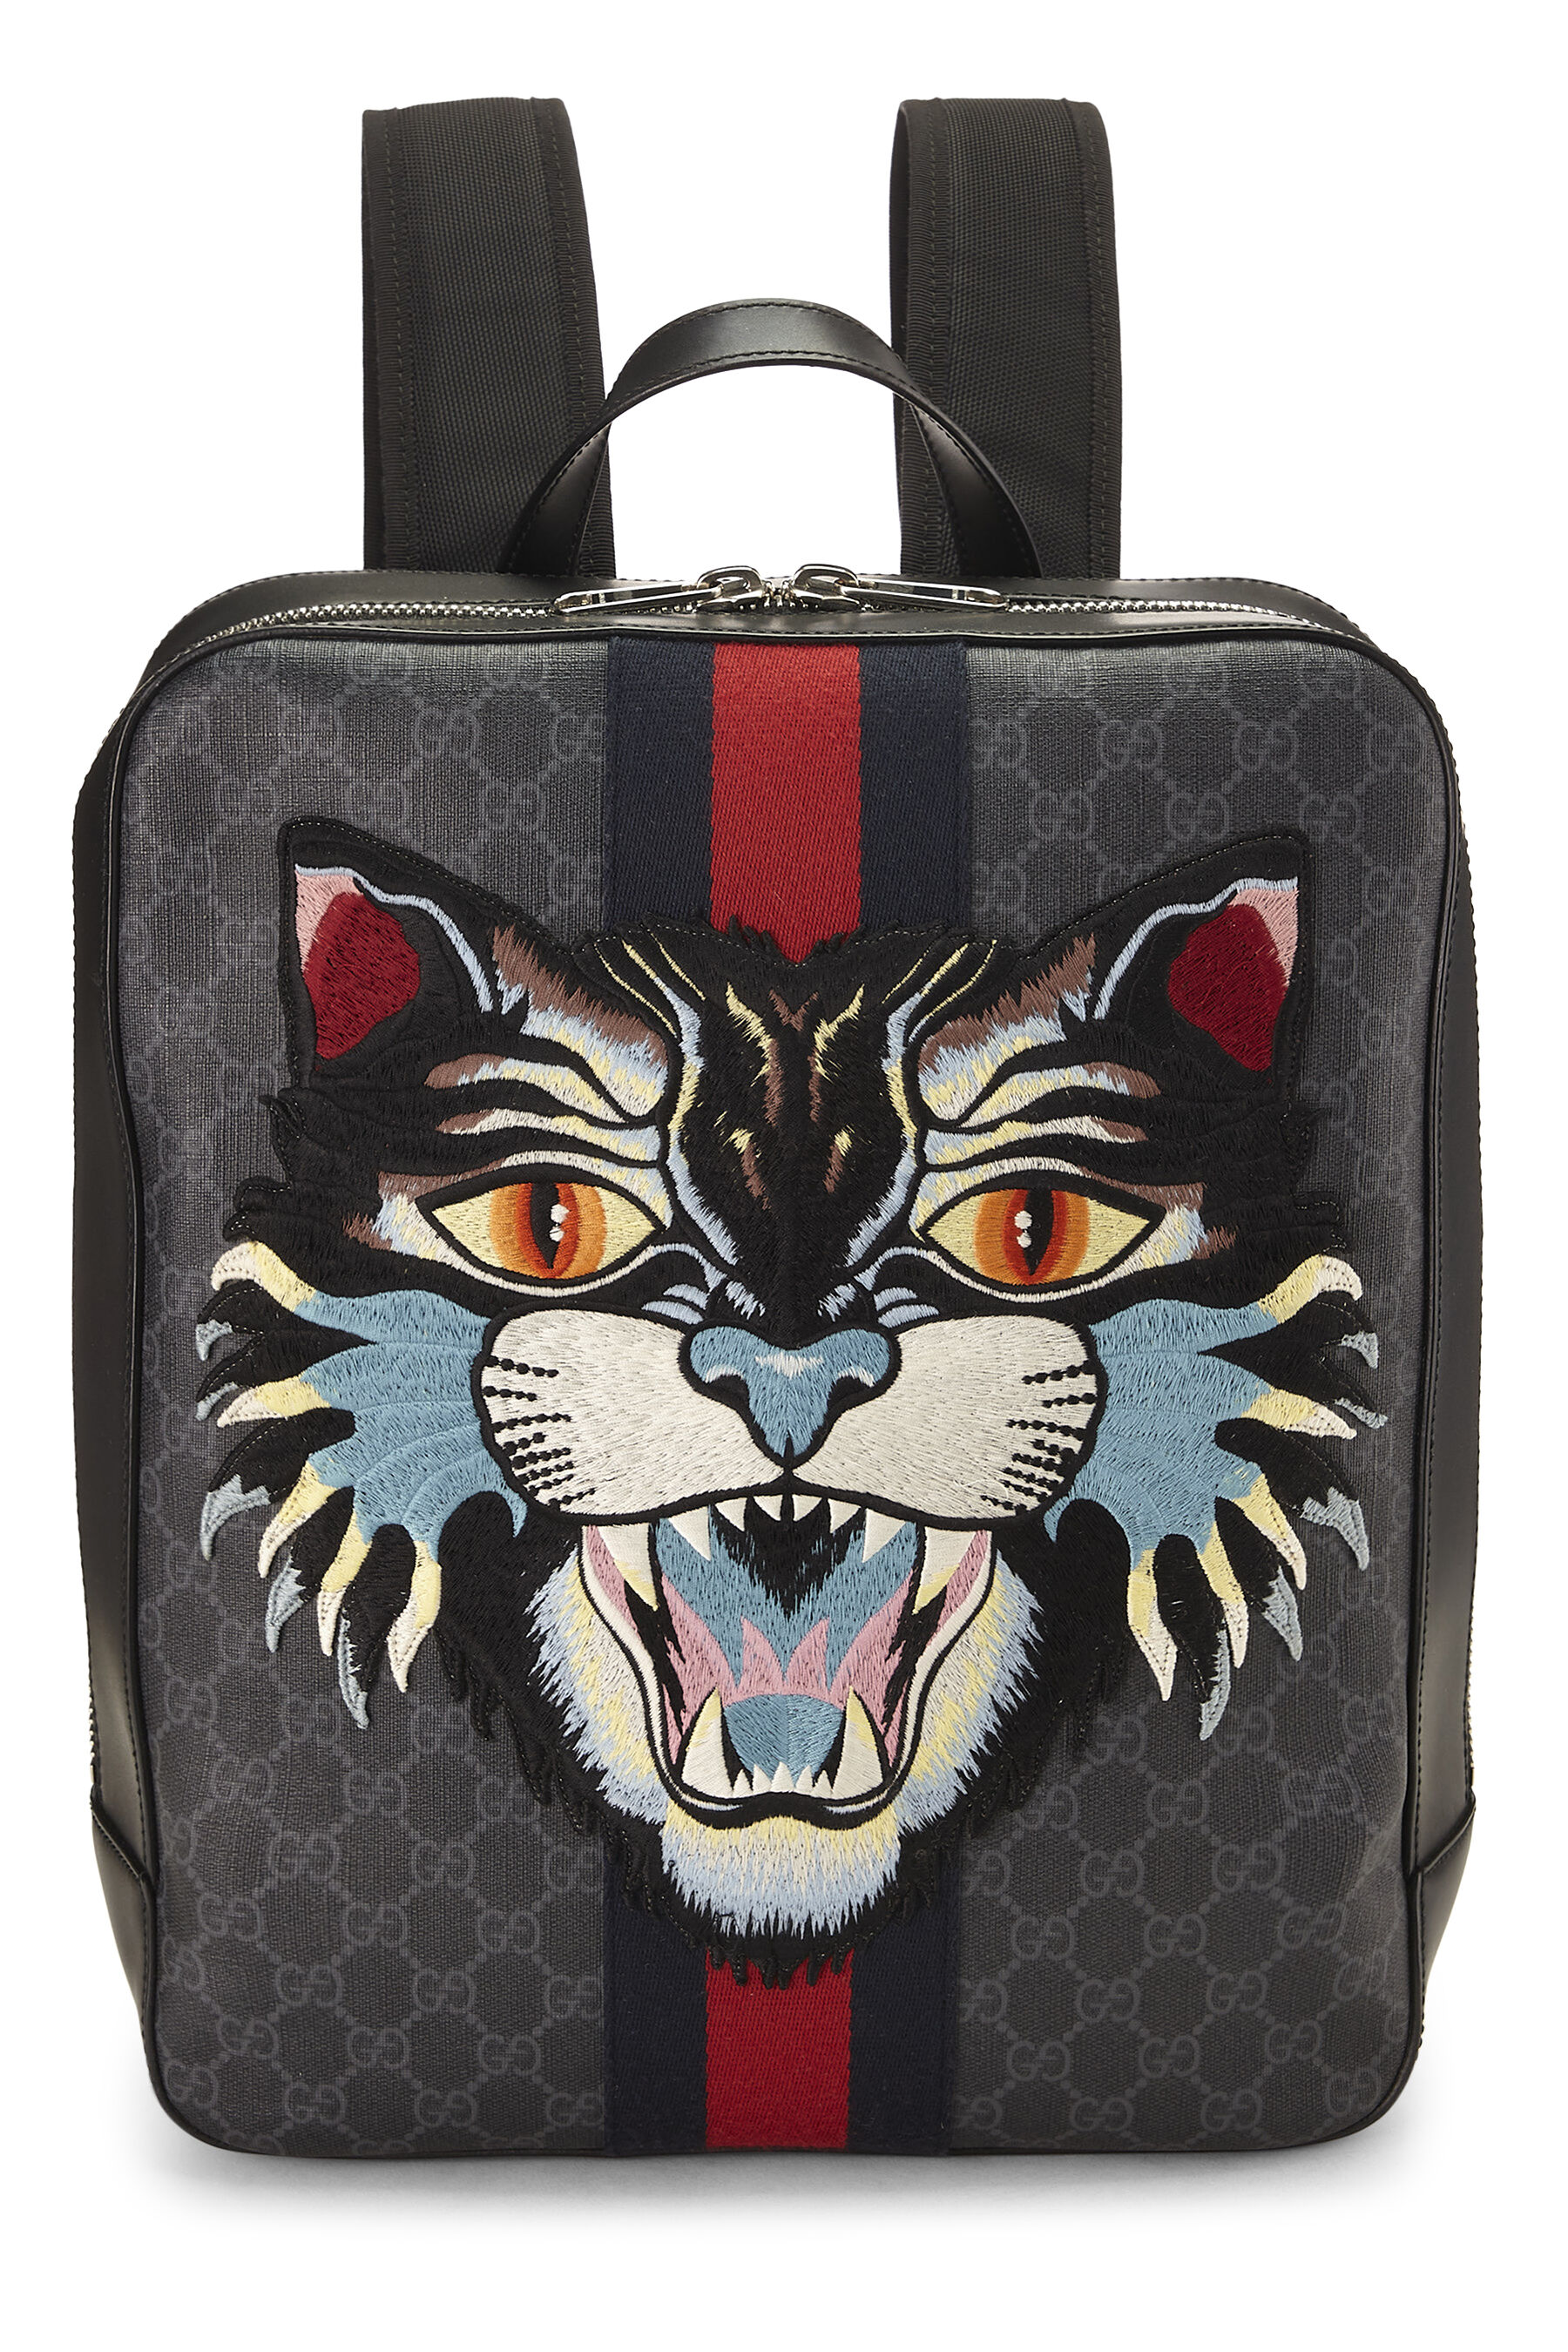 Gucci Black GG Supreme Canvas Angry Cat Web Backpack